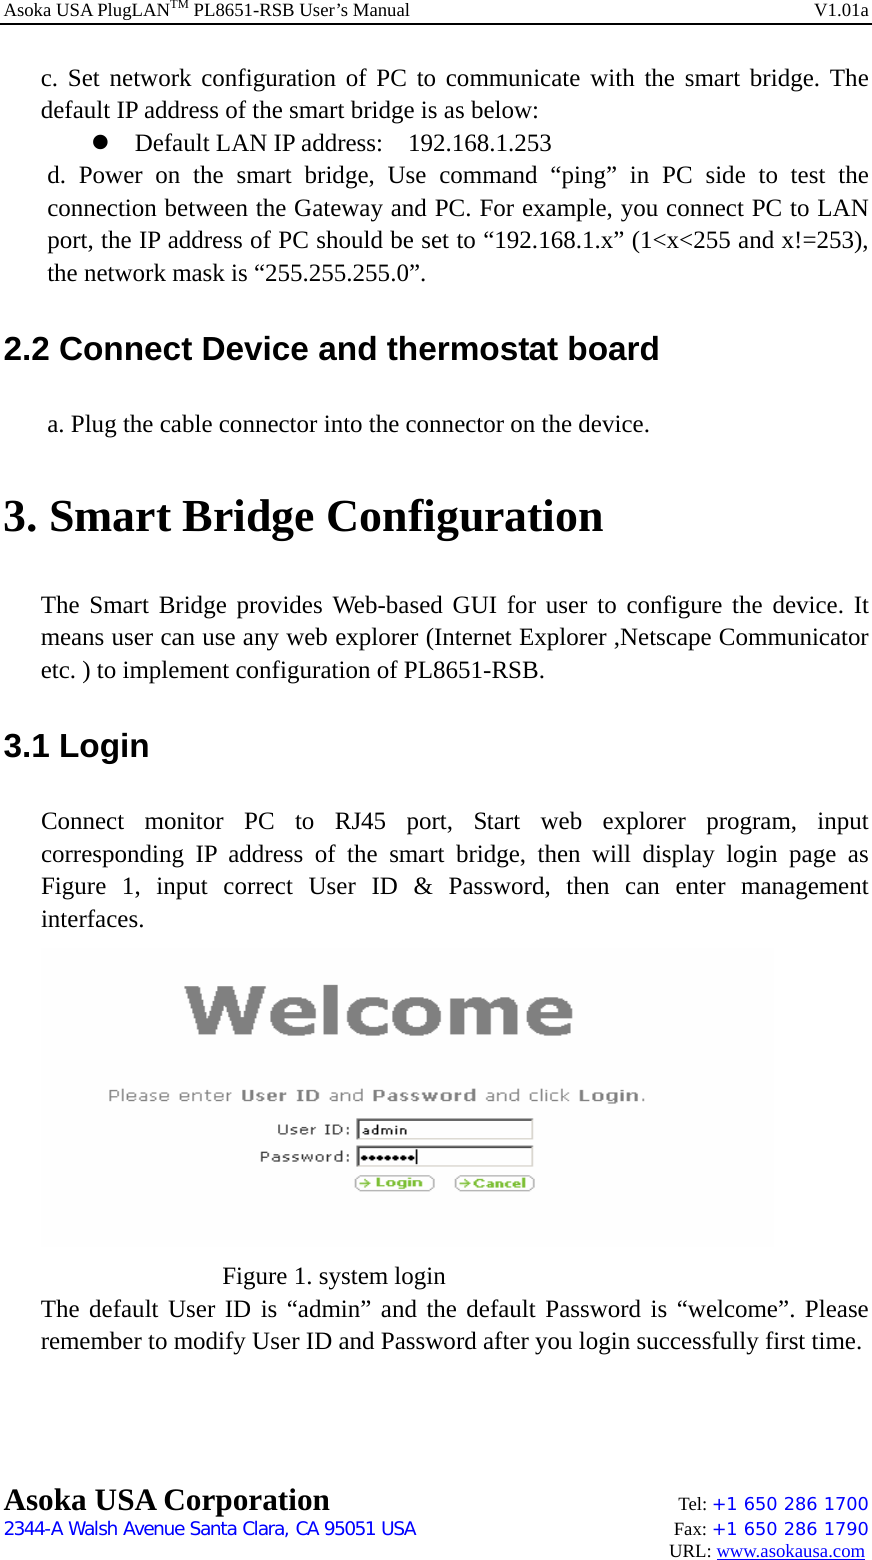 Asoka USA PlugLANTM PL8651-RSB User’s Manual    V1.01a c. Set network configuration of PC to communicate with the smart bridge. The default IP address of the smart bridge is as below: z Default LAN IP address:    192.168.1.253 d. Power on the smart bridge, Use command “ping” in PC side to test the connection between the Gateway and PC. For example, you connect PC to LAN port, the IP address of PC should be set to “192.168.1.x” (1&lt;x&lt;255 and x!=253), the network mask is “255.255.255.0”.   2.2 Connect Device and thermostat board a. Plug the cable connector into the connector on the device. 3. Smart Bridge Configuration The Smart Bridge provides Web-based GUI for user to configure the device. It means user can use any web explorer (Internet Explorer ,Netscape Communicator etc. ) to implement configuration of PL8651-RSB.   3.1 Login Connect monitor PC to RJ45 port, Start web explorer program, input corresponding IP address of the smart bridge, then will display login page as Figure 1, input correct User ID &amp; Password, then can enter management interfaces.       Figure 1. system login The default User ID is “admin” and the default Password is “welcome”. Please remember to modify User ID and Password after you login successfully first time.   Asoka USA Corporation    Tel: +1 650 286 1700    2344-A Walsh Avenue Santa Clara, CA 95051 USA   Fax: +1 650 286 1790                                                                                     URL: www.asokausa.com 